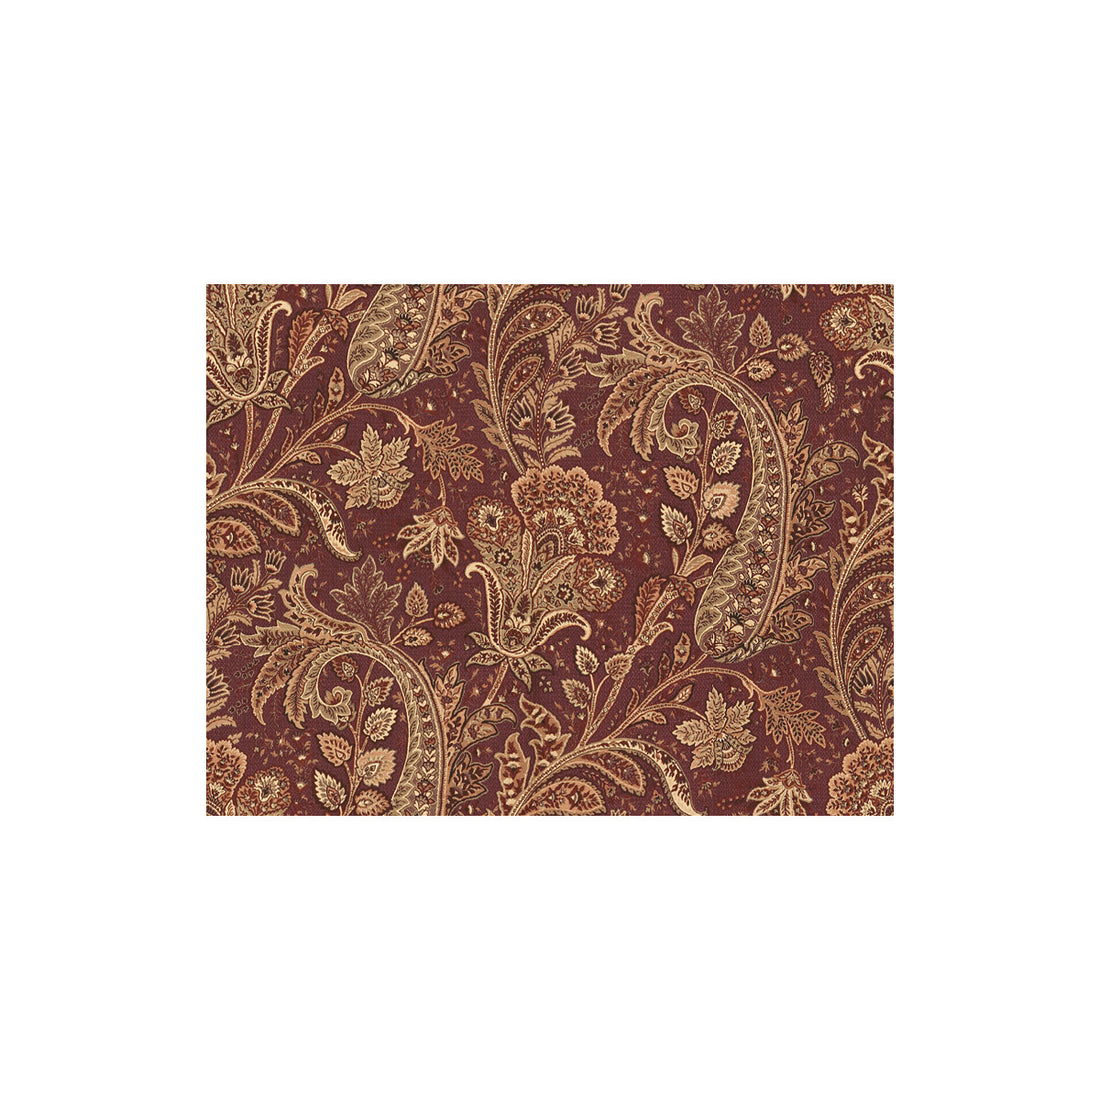 Romance Two fabric in fig color - pattern 30537.10.0 - by Kravet Couture